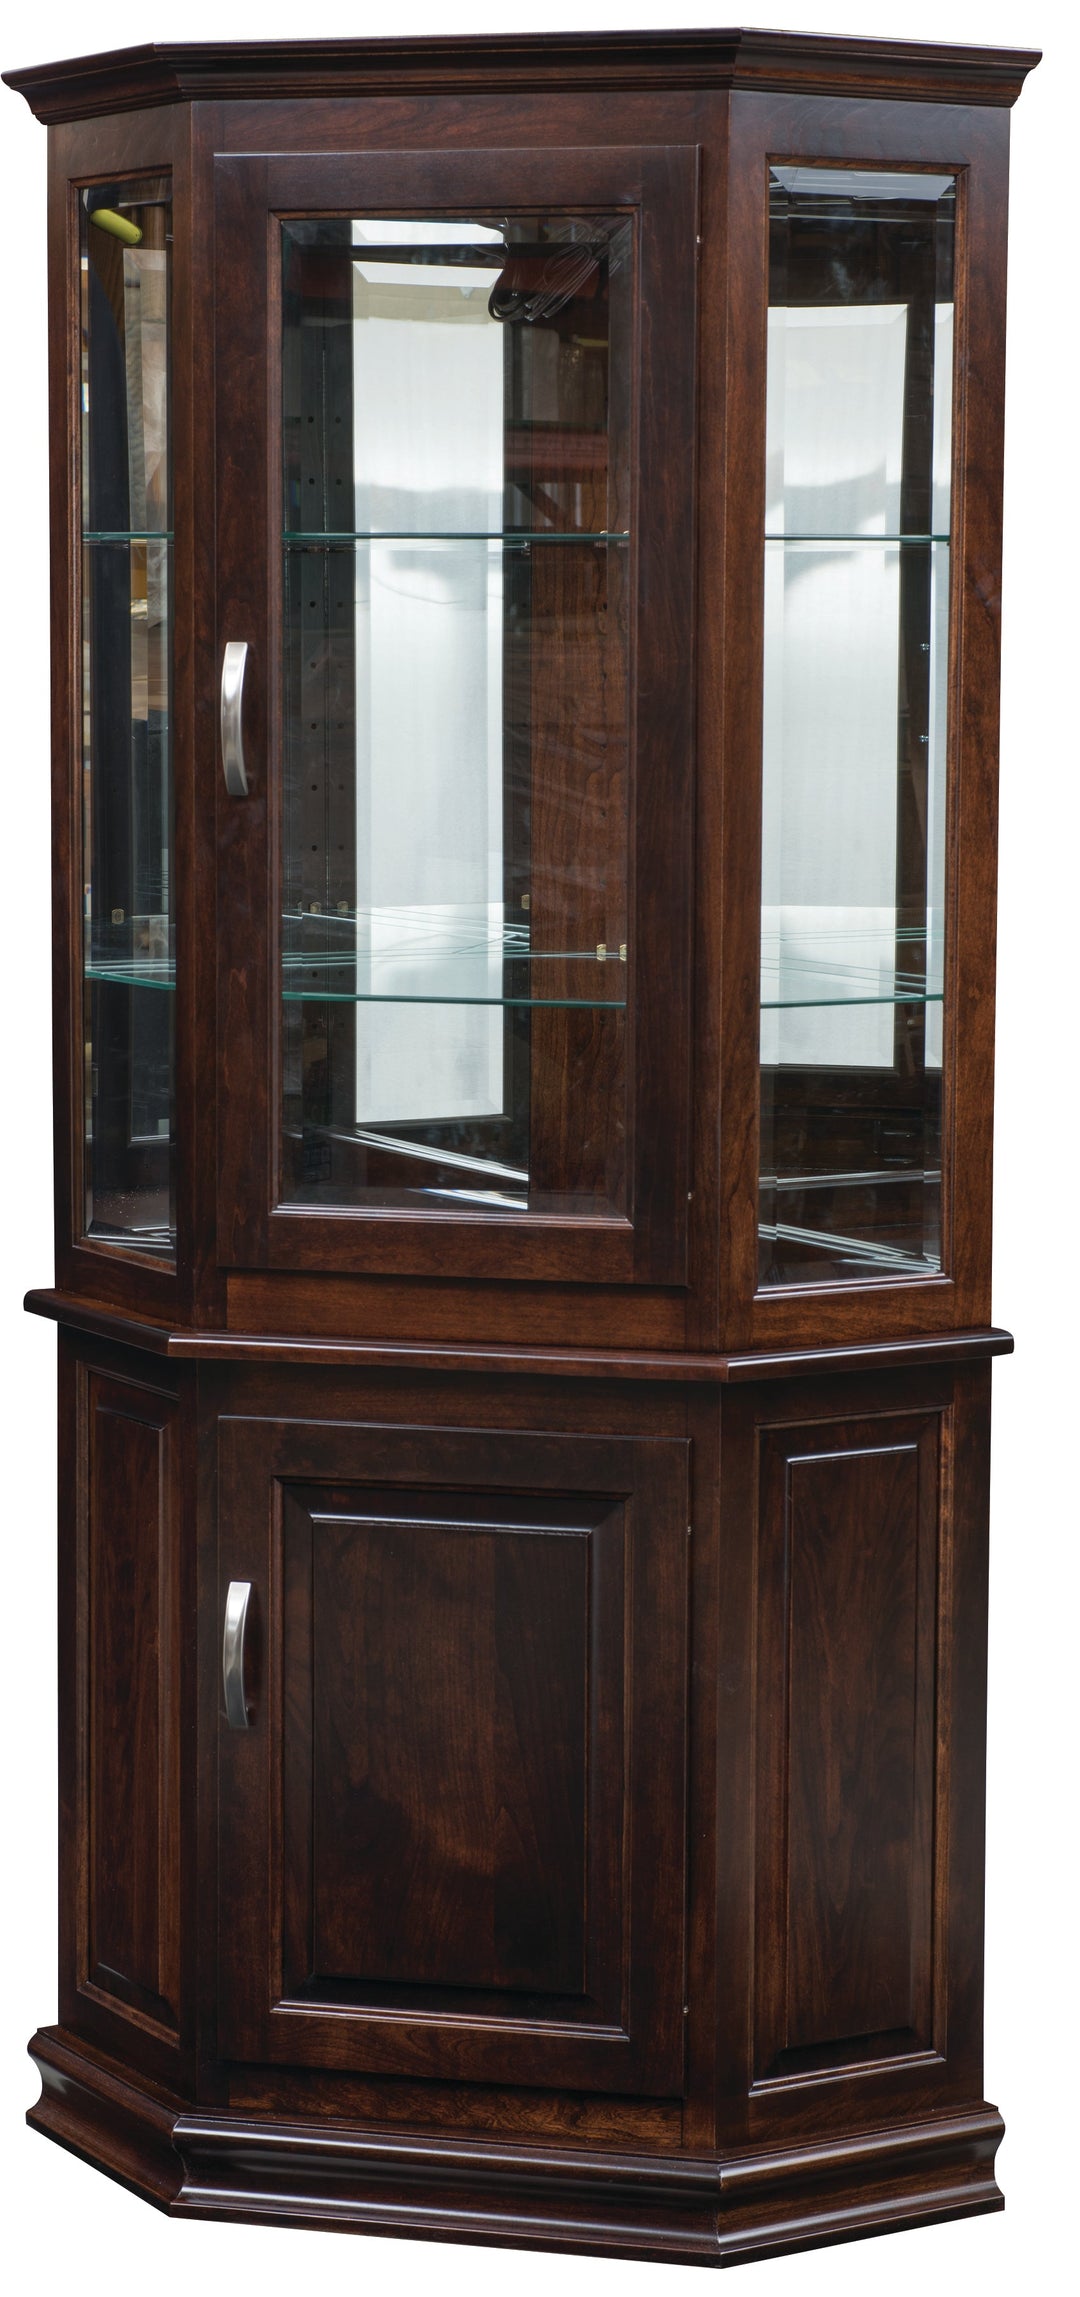 QW Amish Corner Deluxe with Enclosed Base Curio